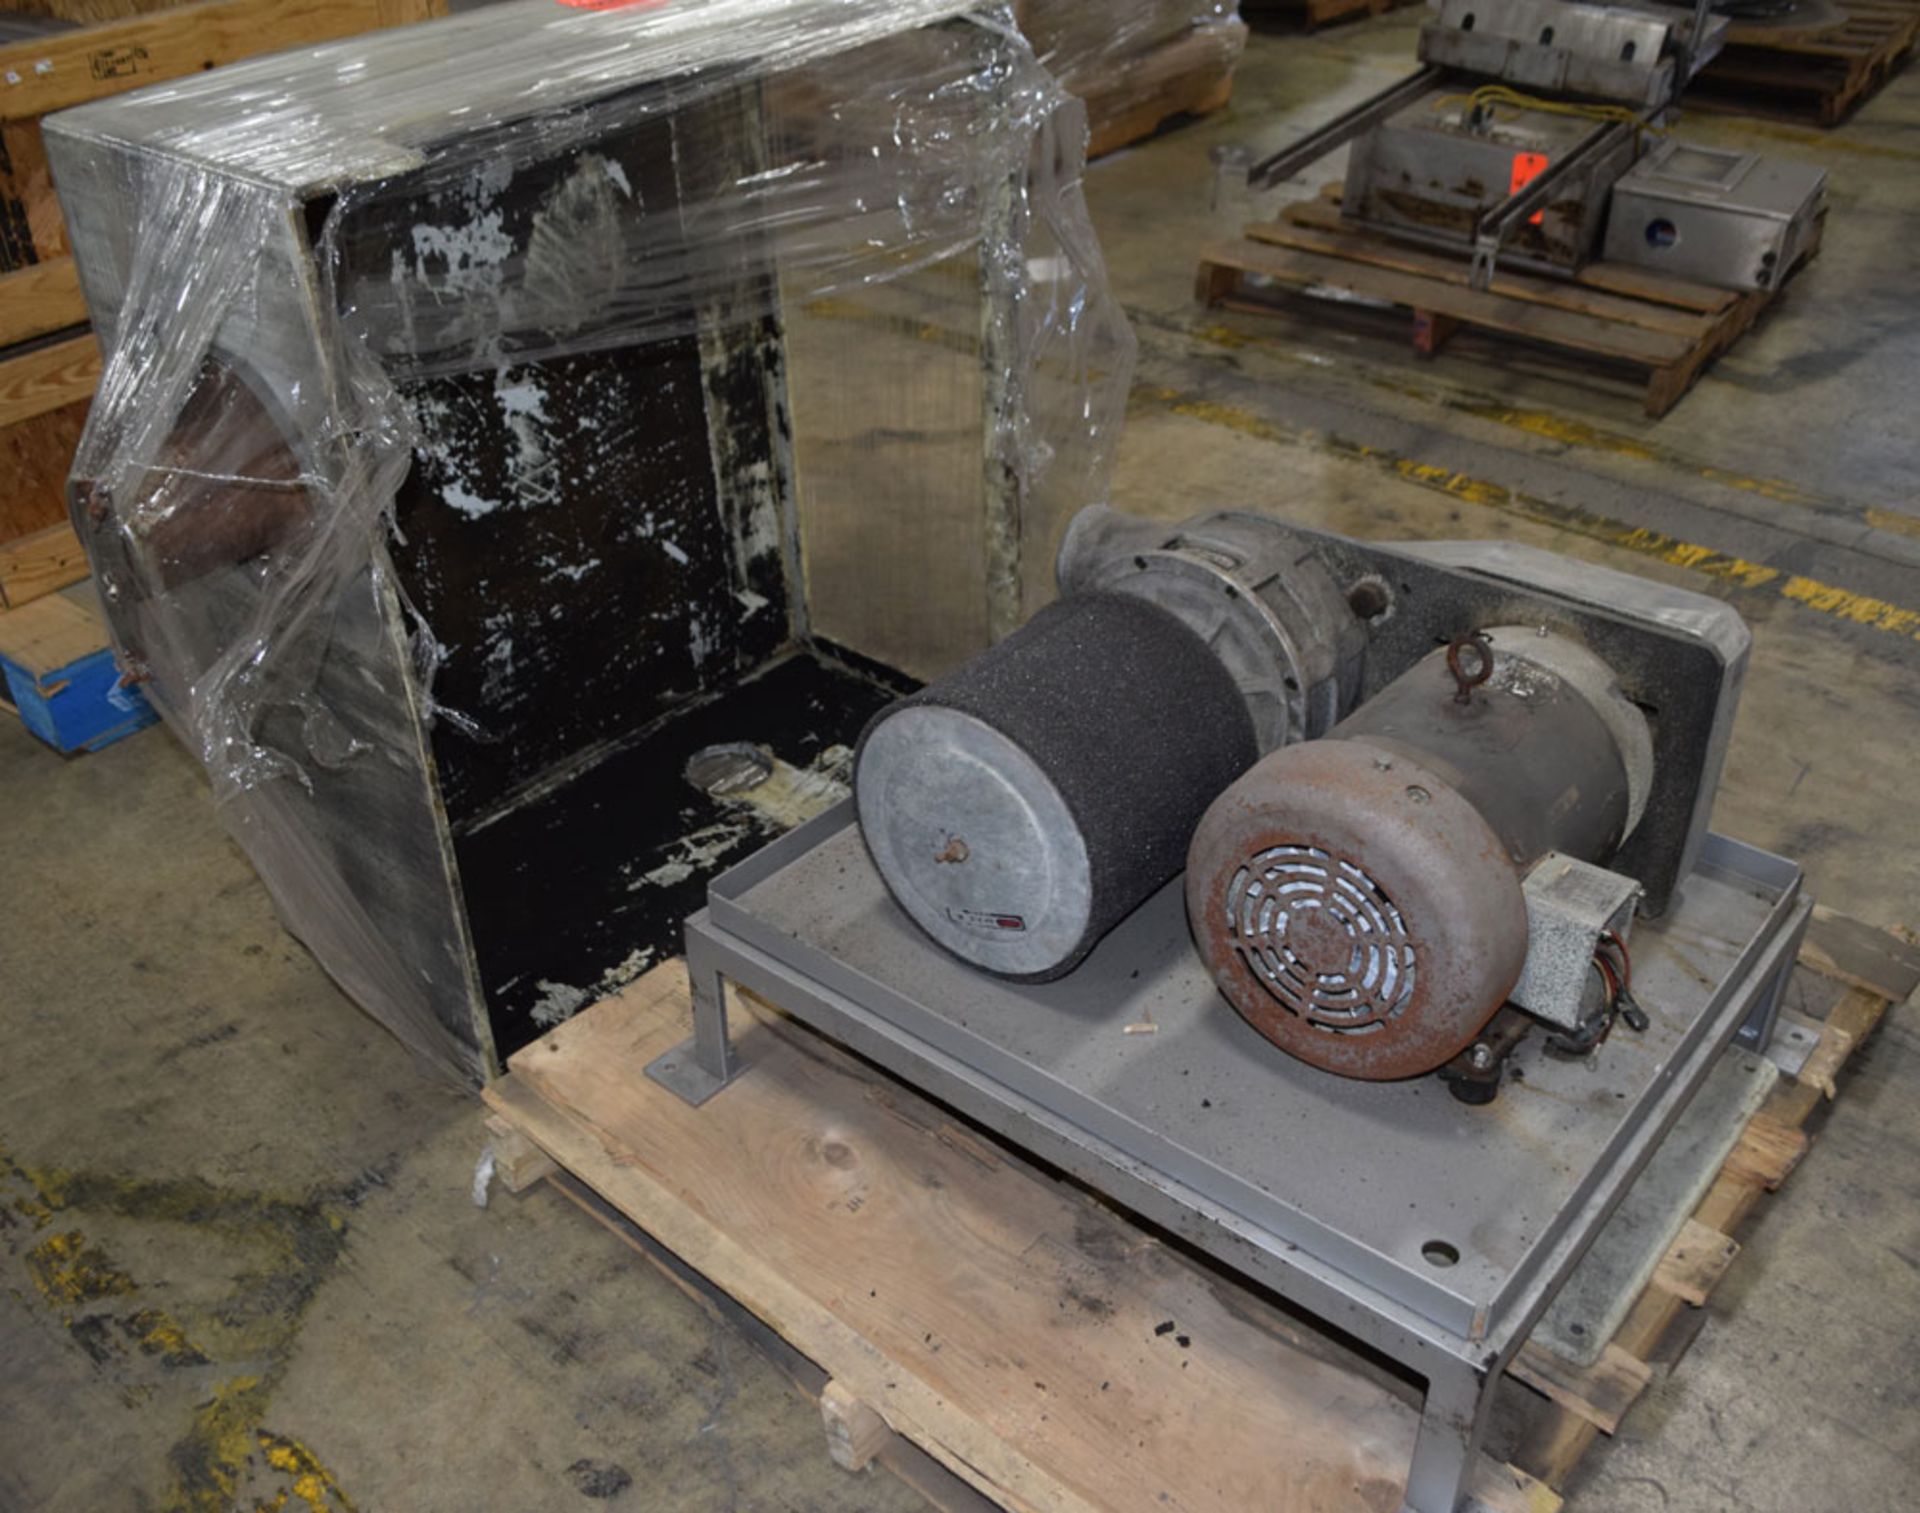 Lot - (2) Blowers. (1) Sonic Air Systems, Model Sonic 100, 10hp Motor with Enclosure, (1) Republic